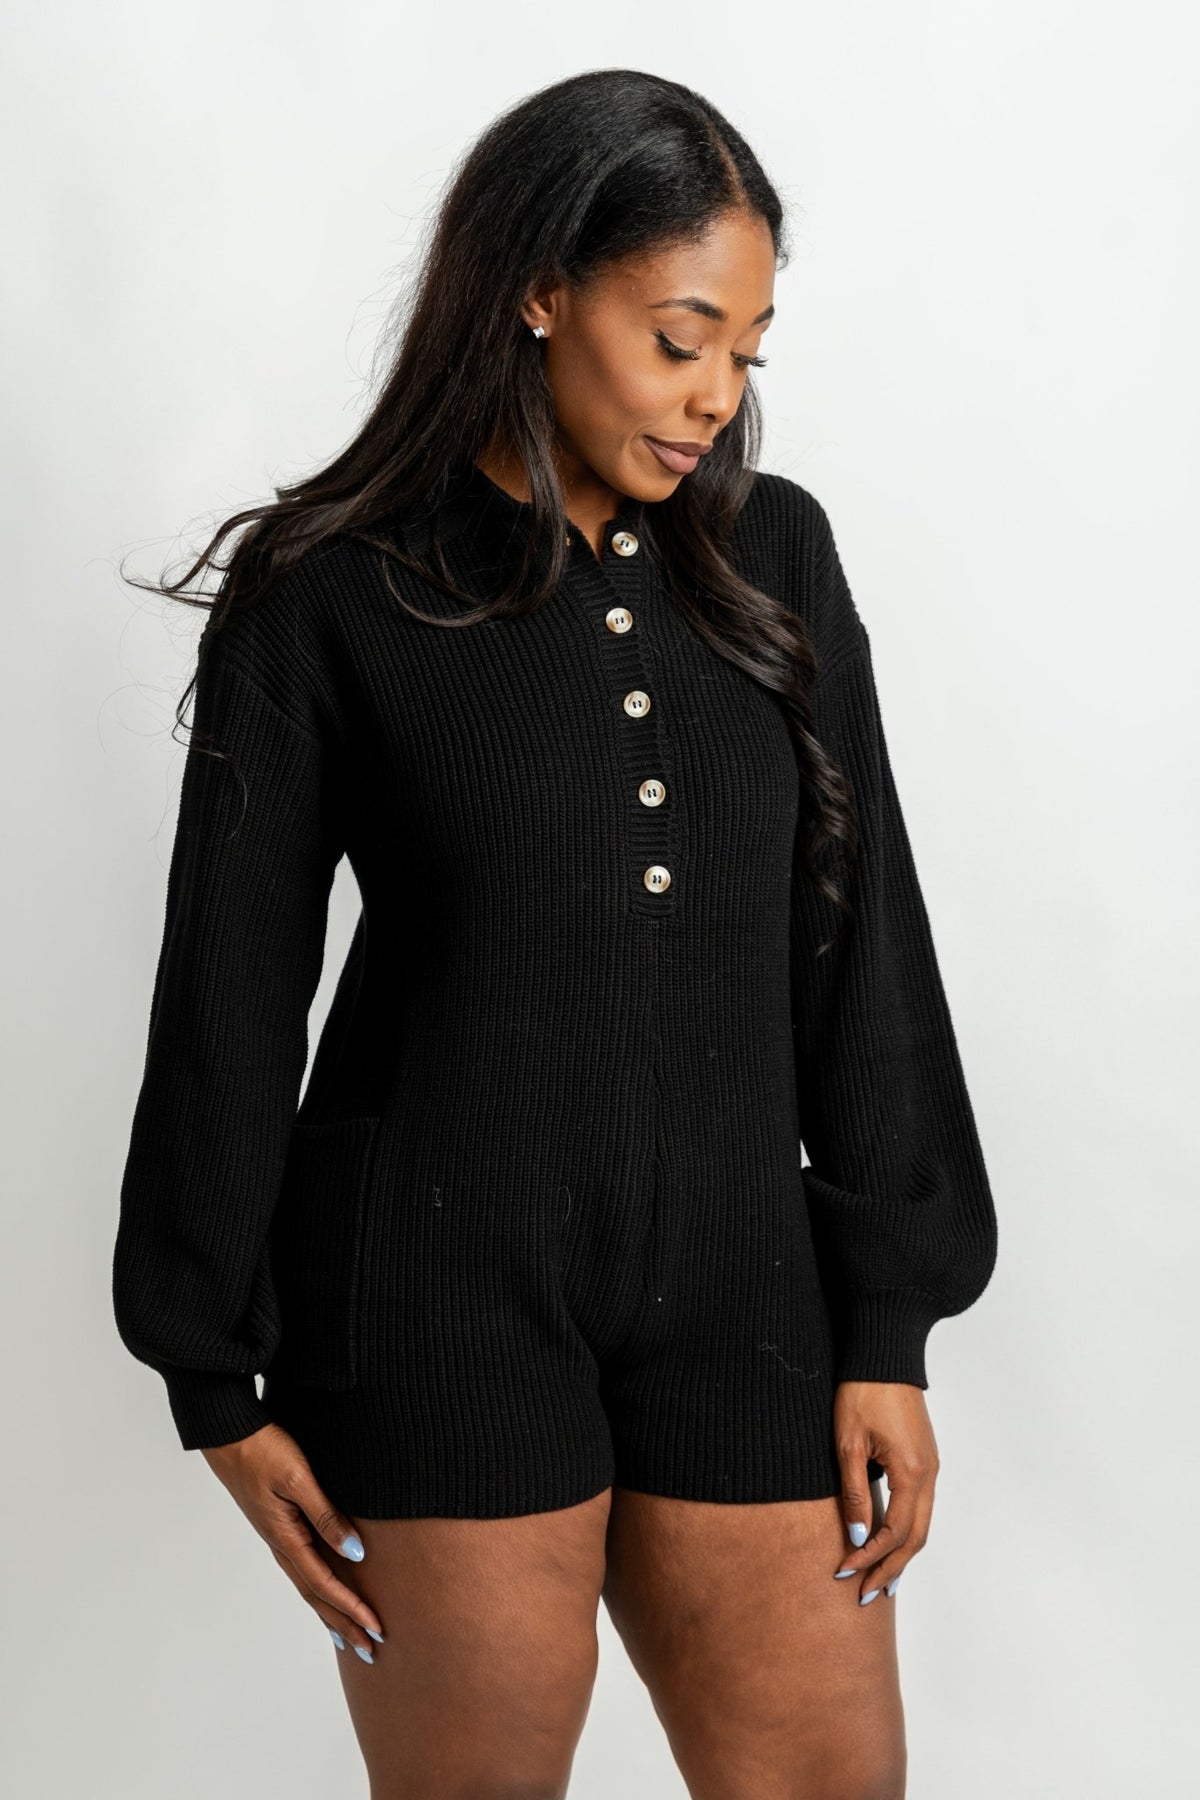 Long sleeve sweater romper black - Cute Romper - Trendy Rompers and Pantsuits at Lush Fashion Lounge Boutique in Oklahoma City